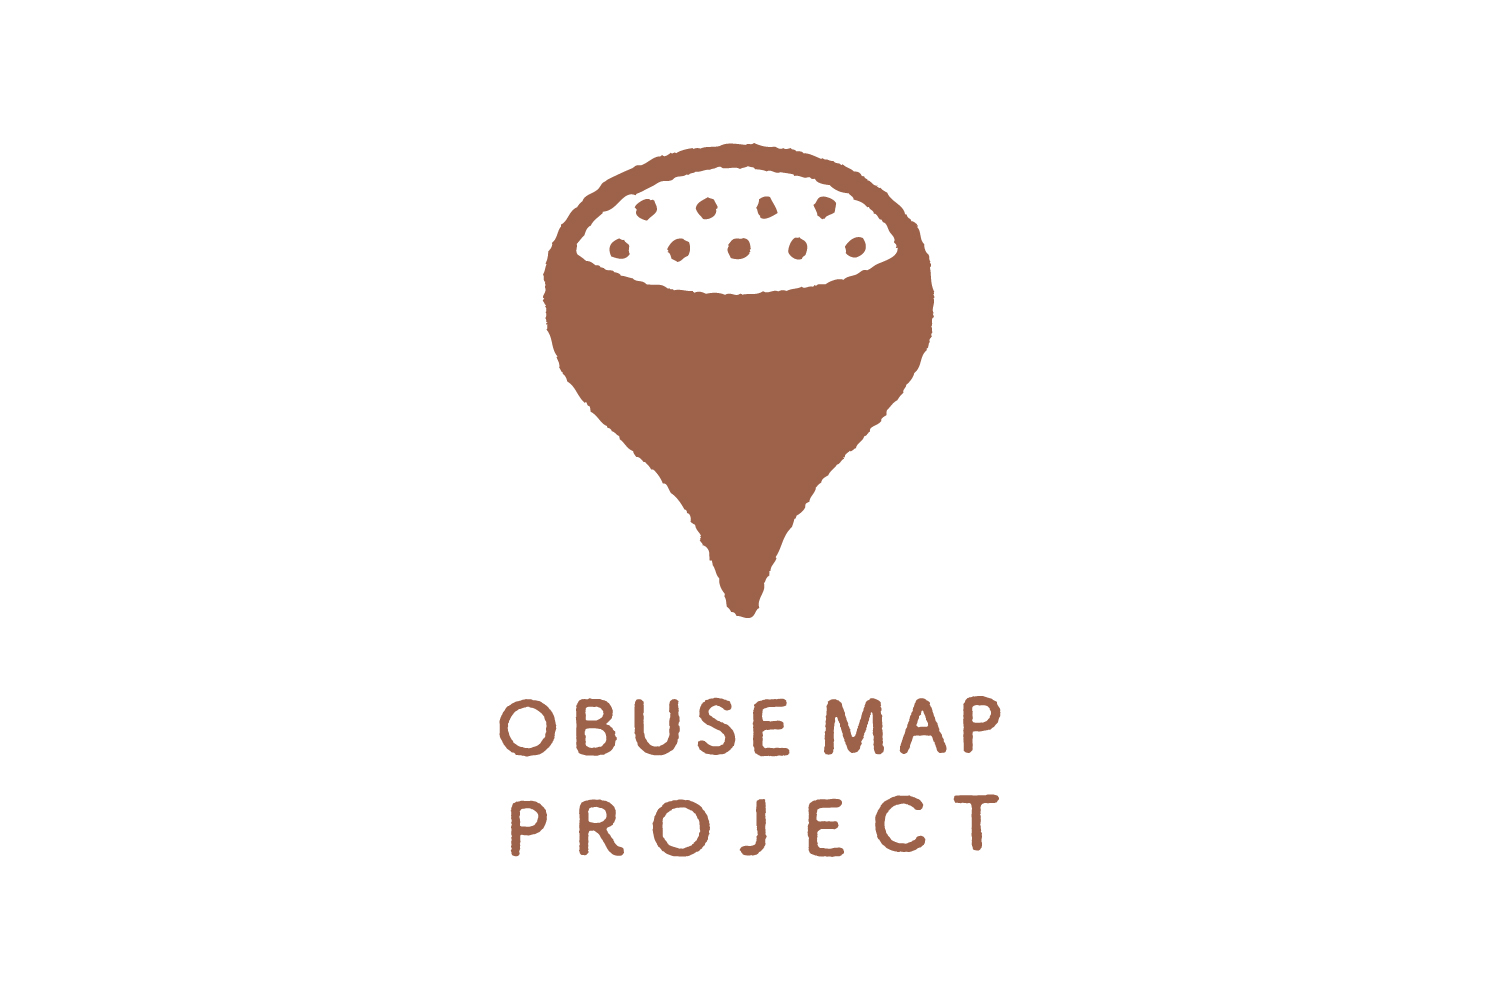 OBUSE MAP PROJECT